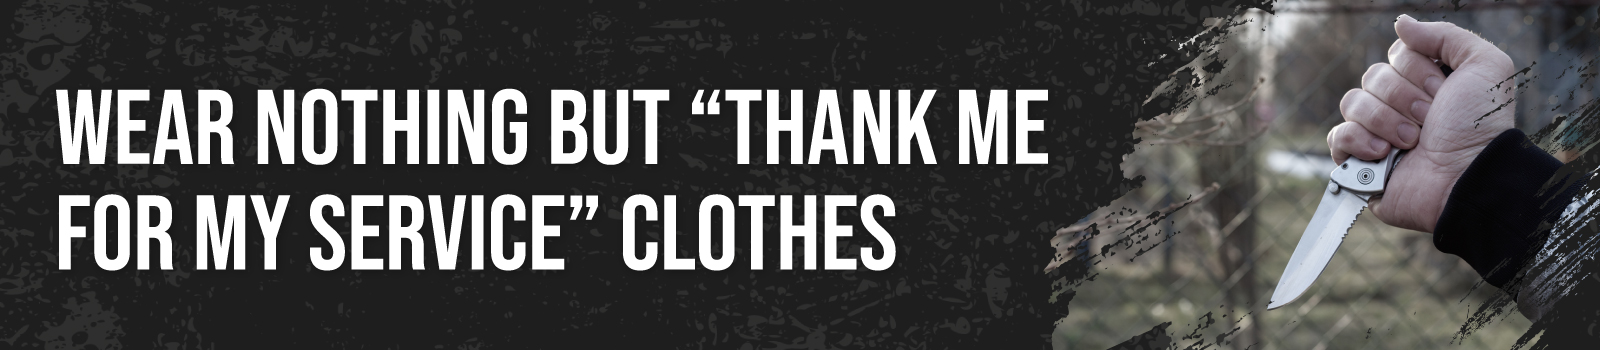 17 Things You Should NOT Do to Celebrate Veterans Day Weekend - #6 Wear Nothing but “Thank Me for My Service” Clothes